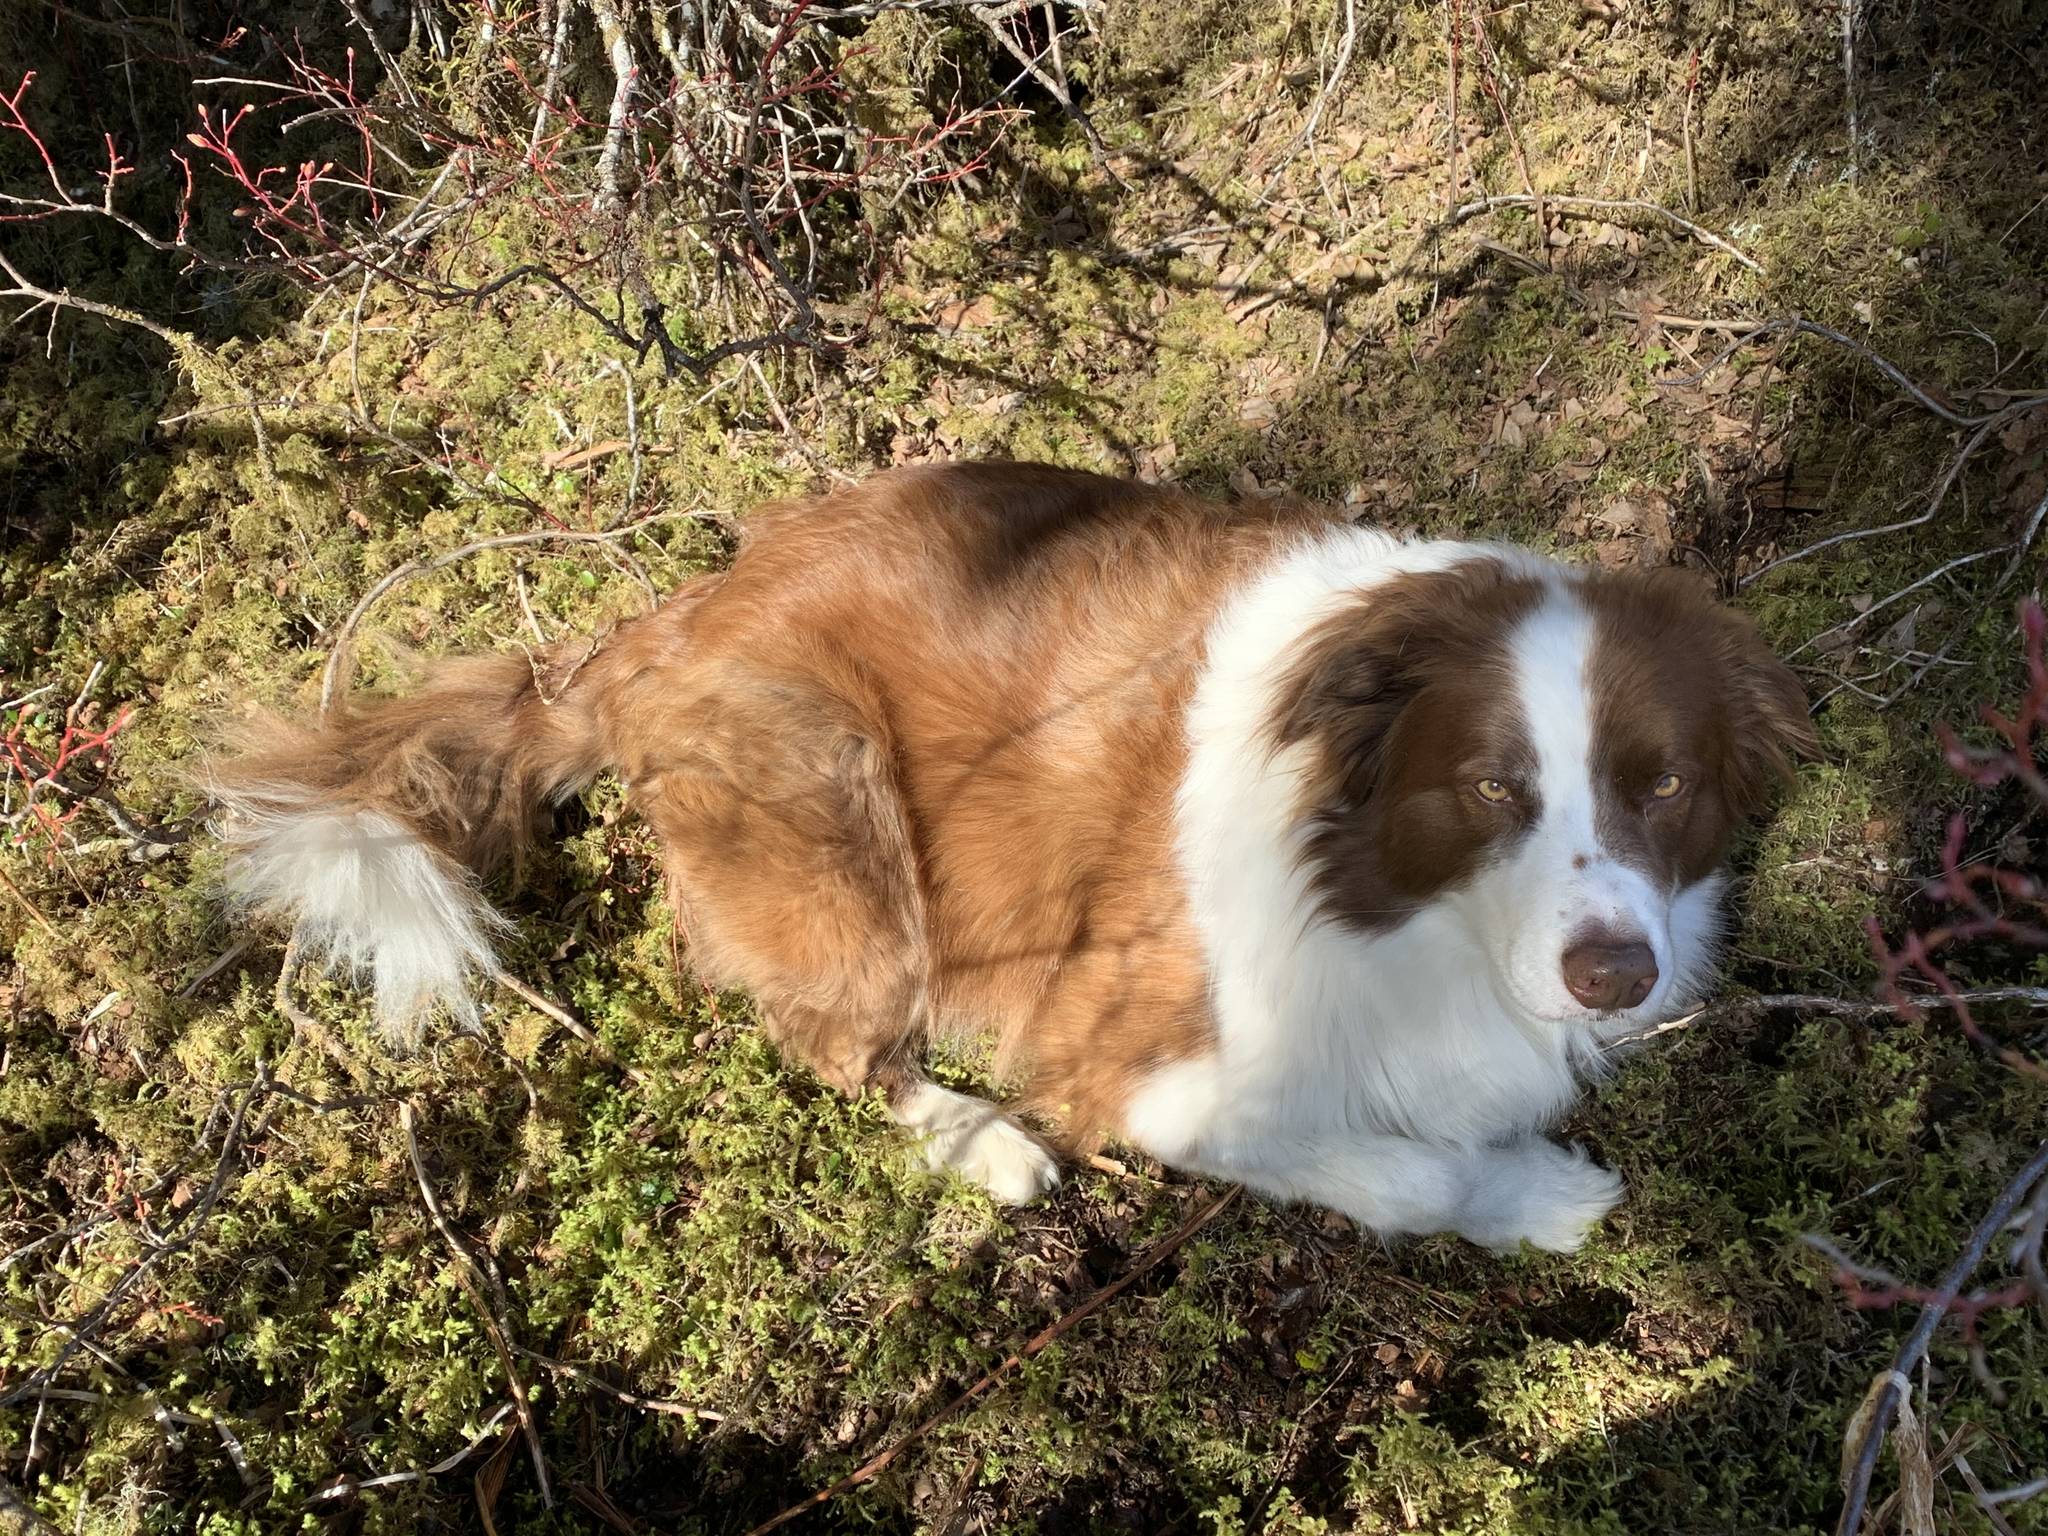 Oscar rests in the warm spring muskeg. (Vivian Faith Prescott | For the Capital City Weekly)